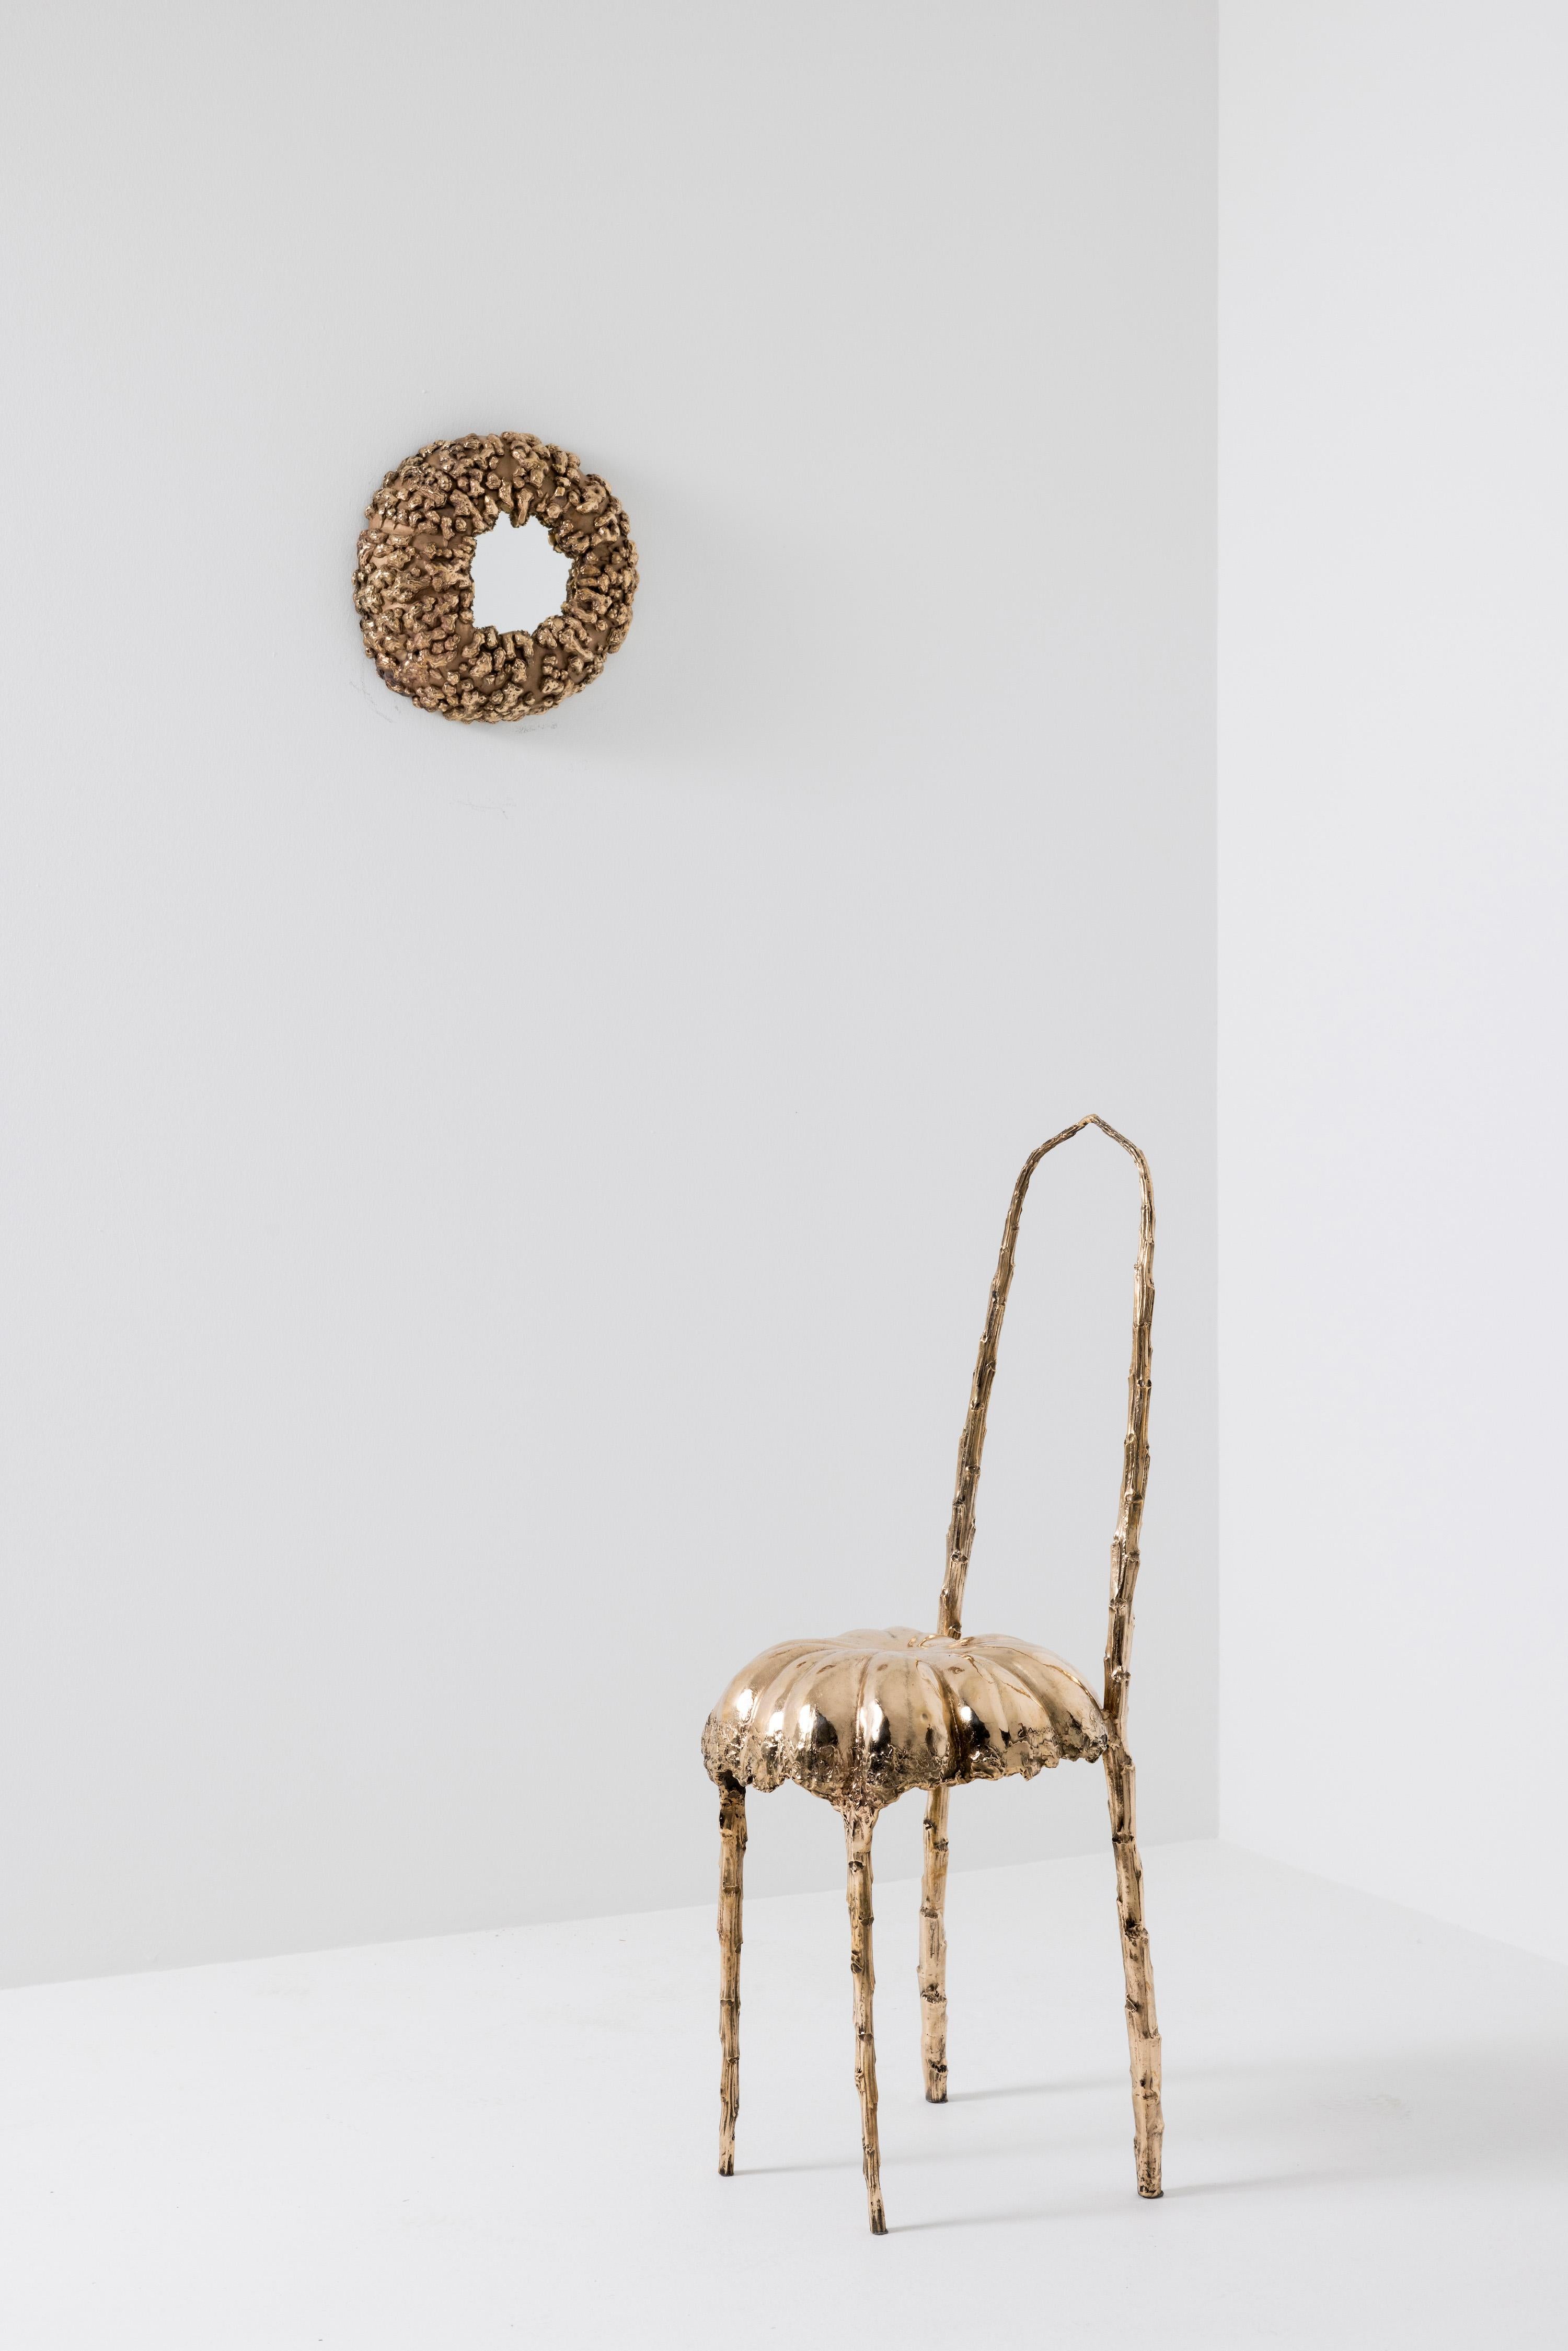 Mirror Peanuts by Clotilde Ancarani
Material: Bronze, golden polish
Dimensions: H 9 x Ø 38 cm
Type: One of a kind
Year: 2023
Hand-made in Belgium

Clotilde Ancarani’s sculptural designs express a universal language derived from her